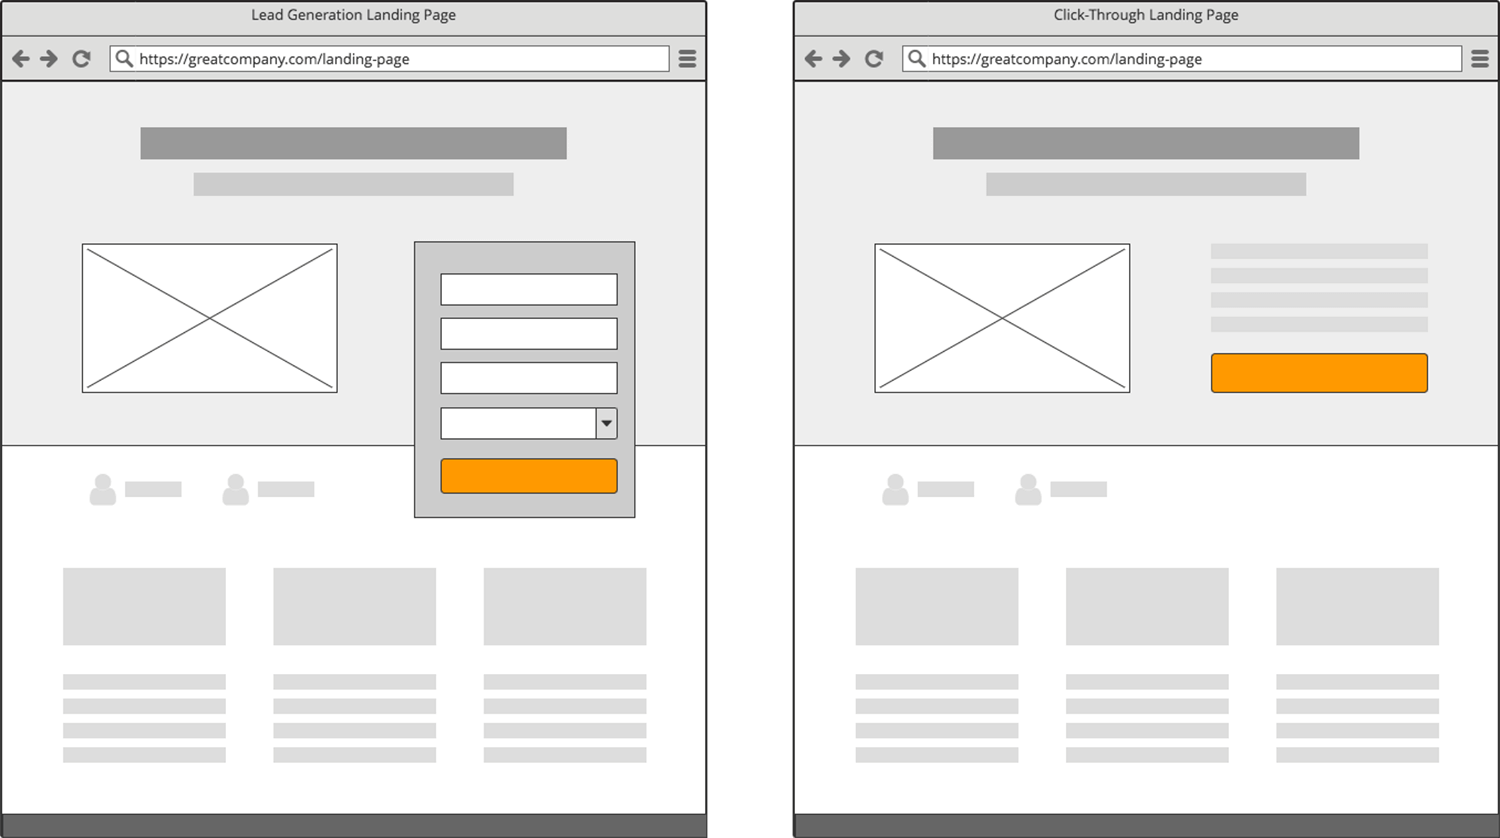 Two different types of landing pages.